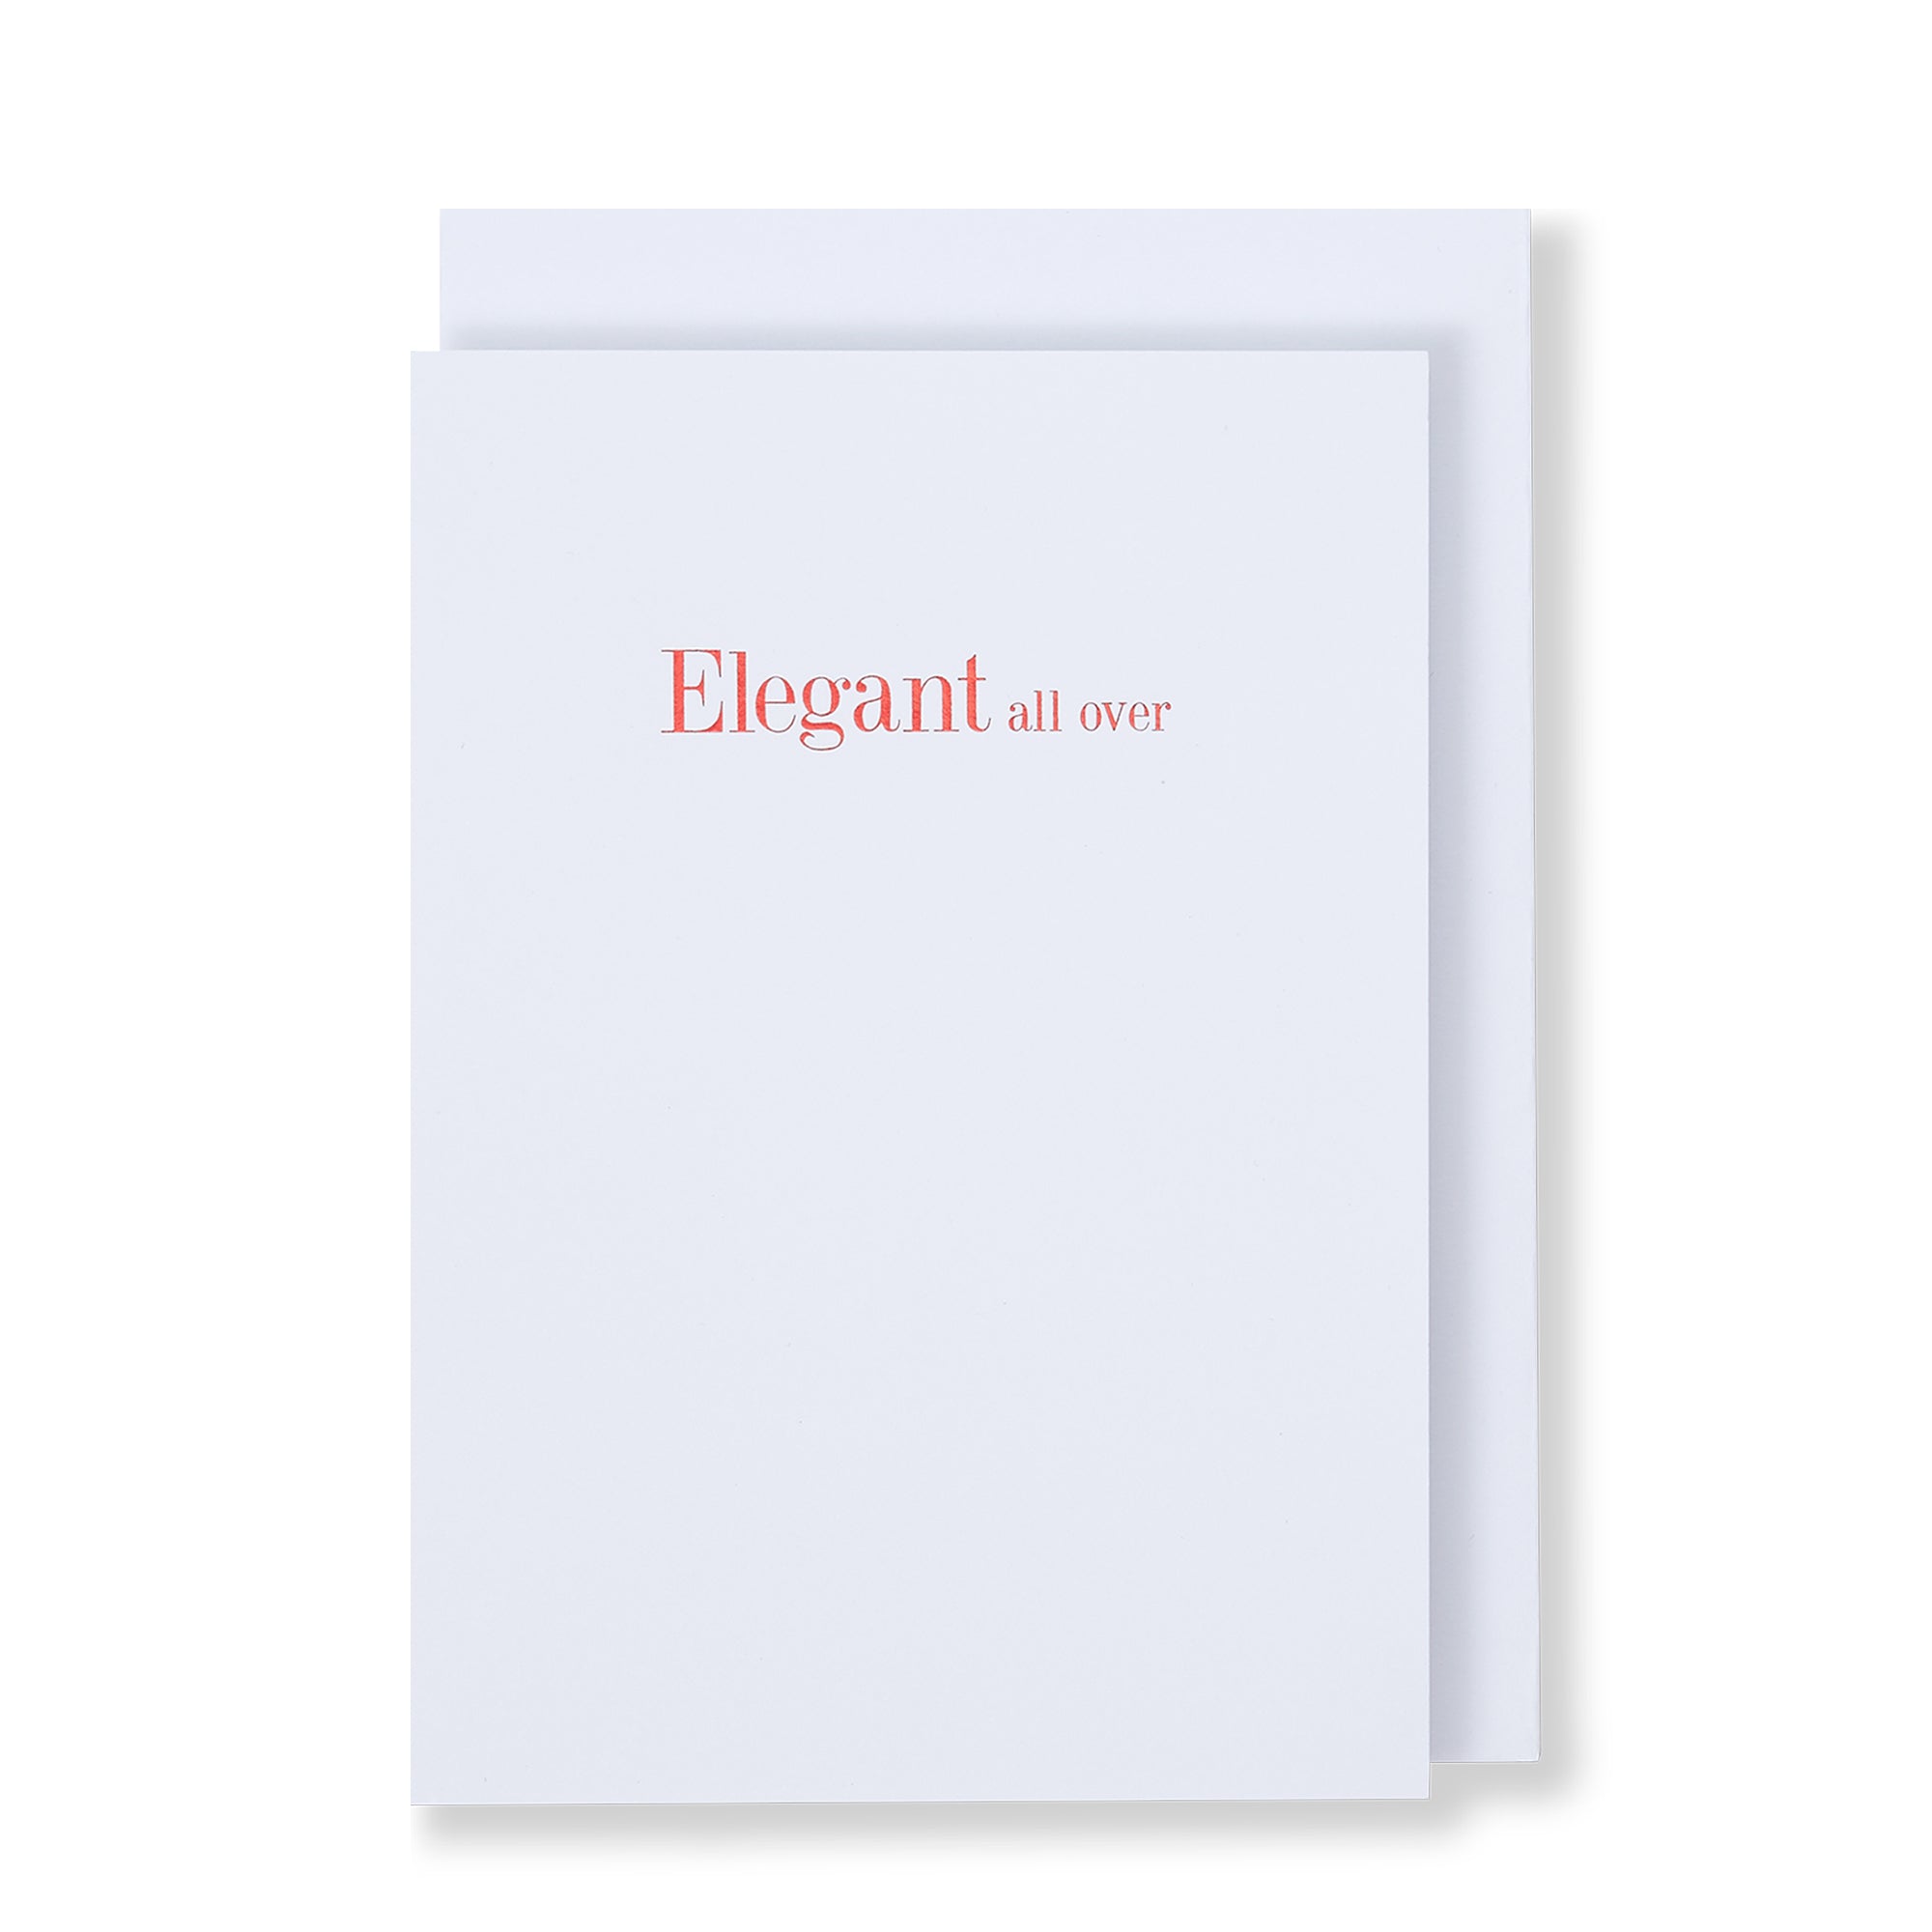 Elegant All Over Greeting Card in White, Front